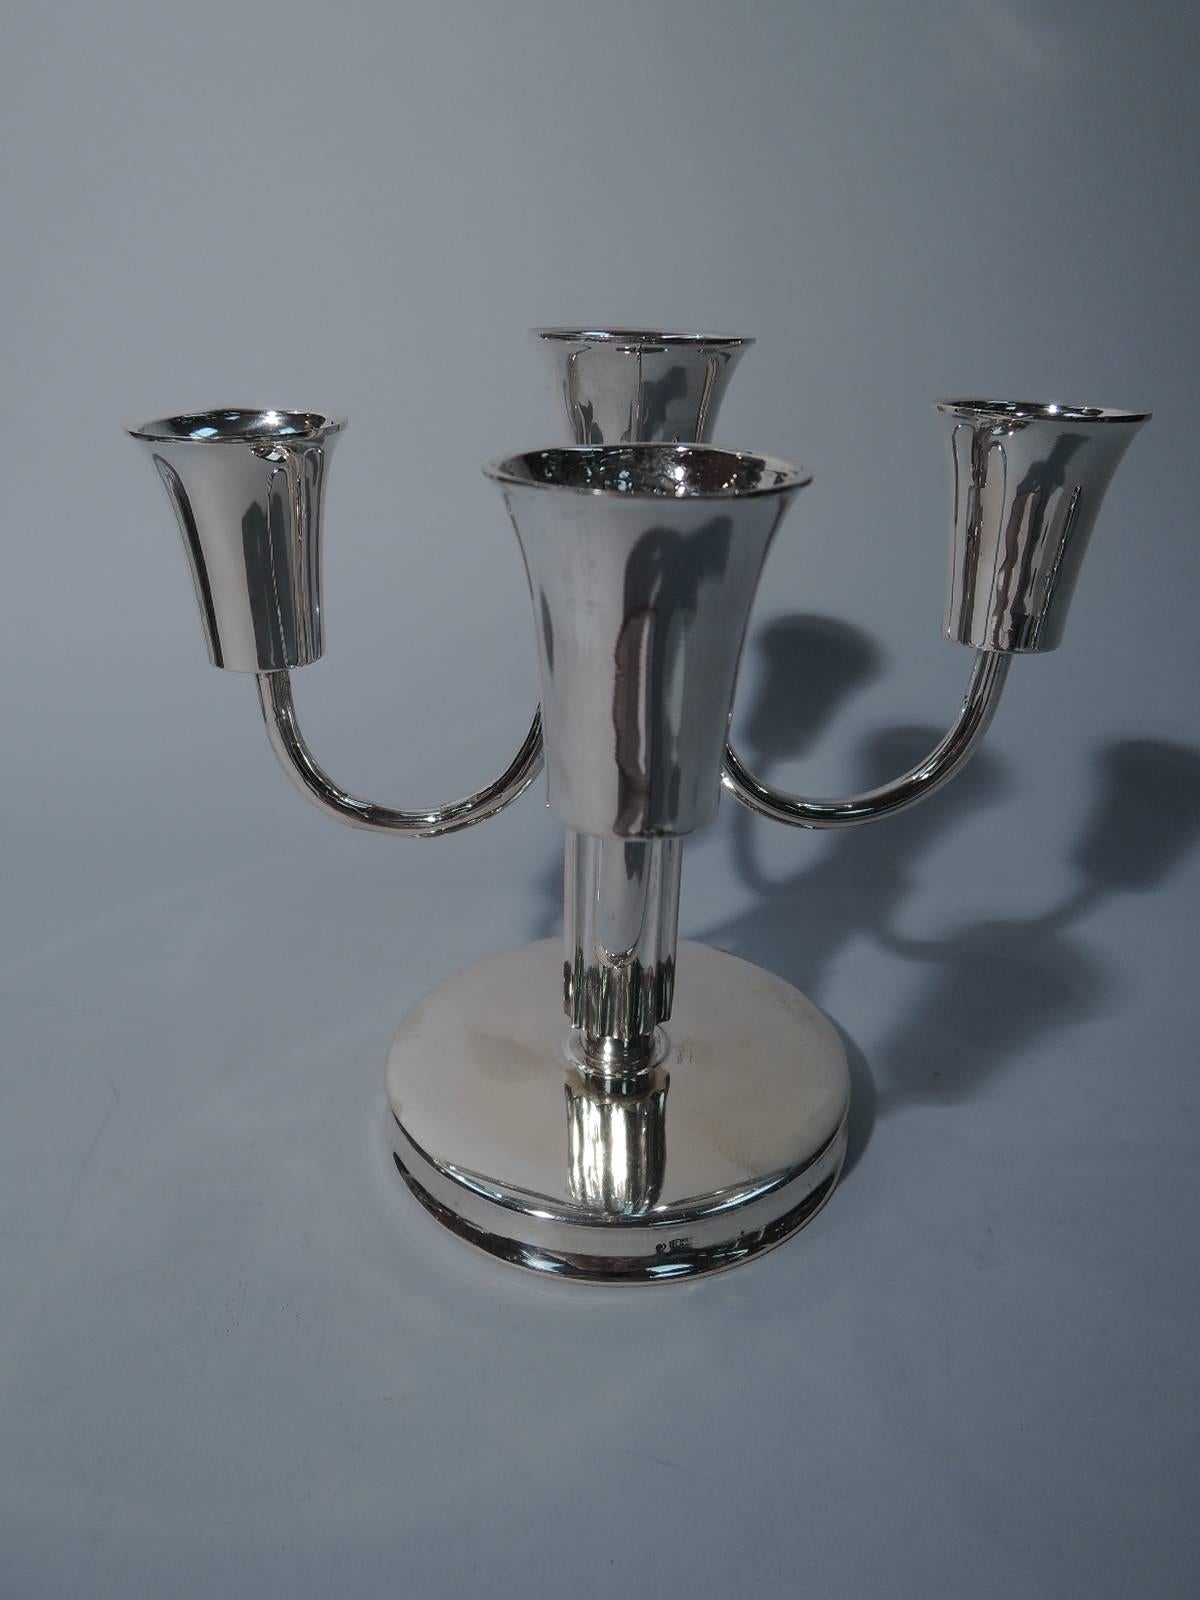 Austrian Art Deco silver 5-light candelabrum. Fluted pillar shaft supporting central socket and 4 c-scroll arms each terminating in single socket. Shaft mounted to circular base with concave sides. A striking solo stick. Hallmarked. Very nice